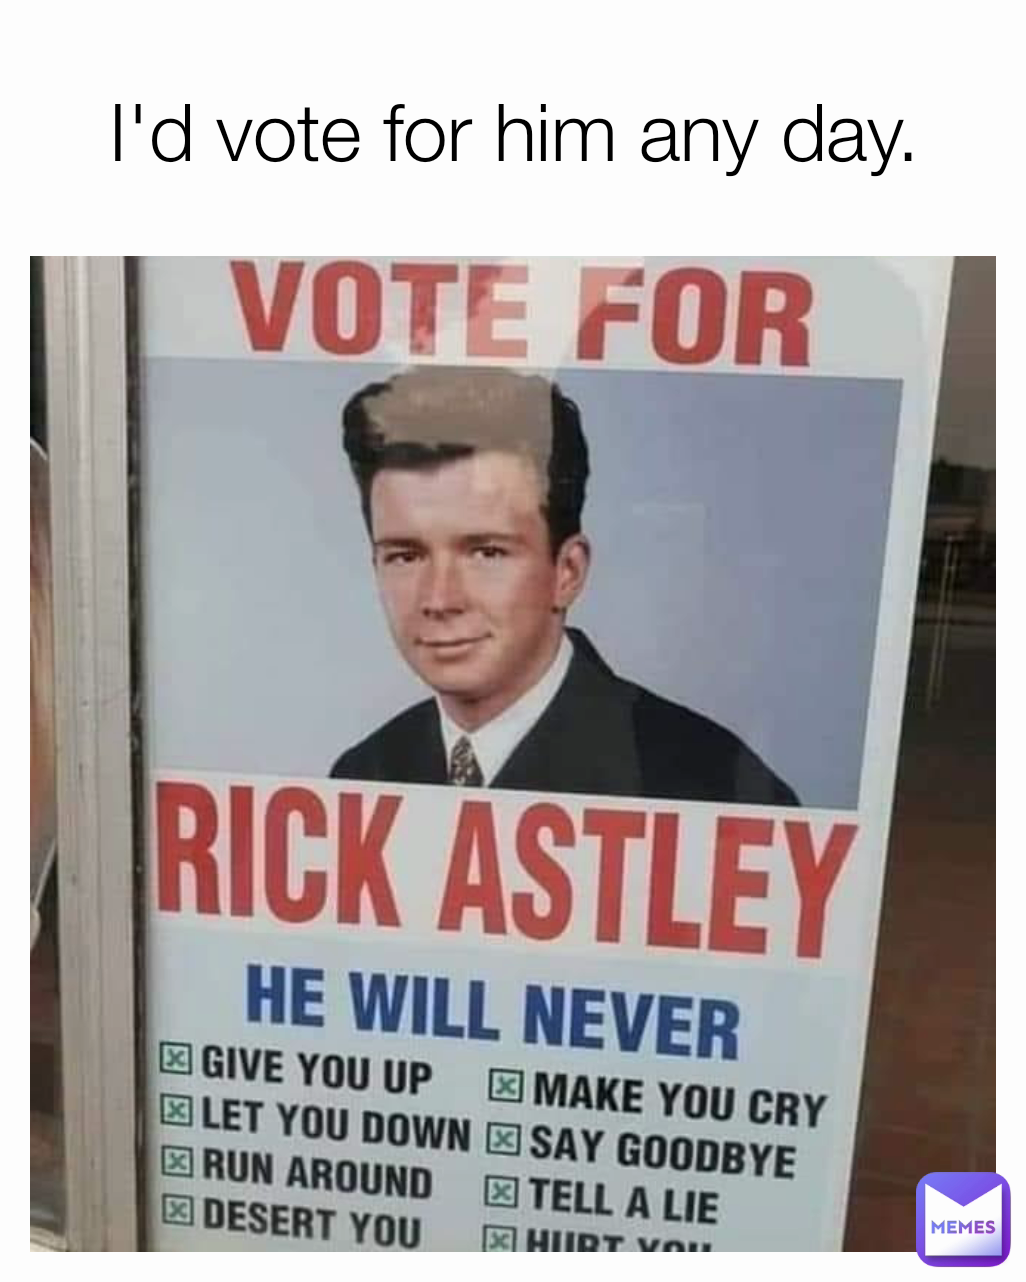 I'd vote for him any day.